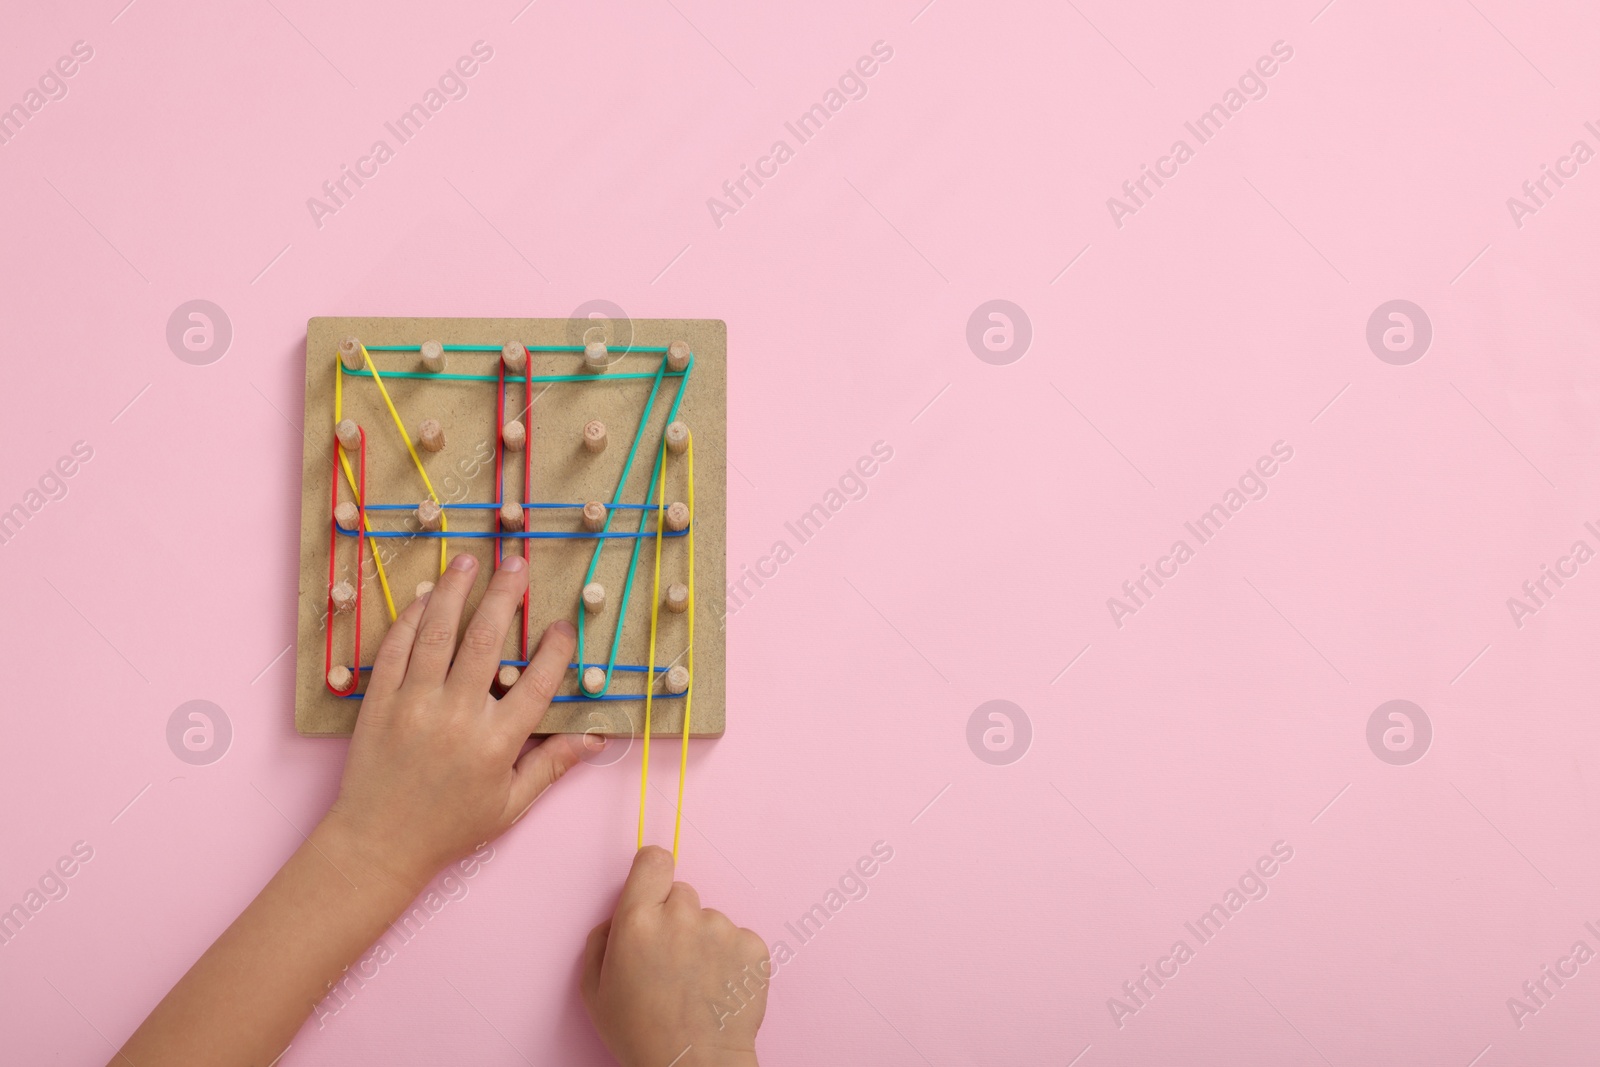 Photo of Motor skills development. Boy playing with geoboard and rubber bands at pink table, top view. Space for text